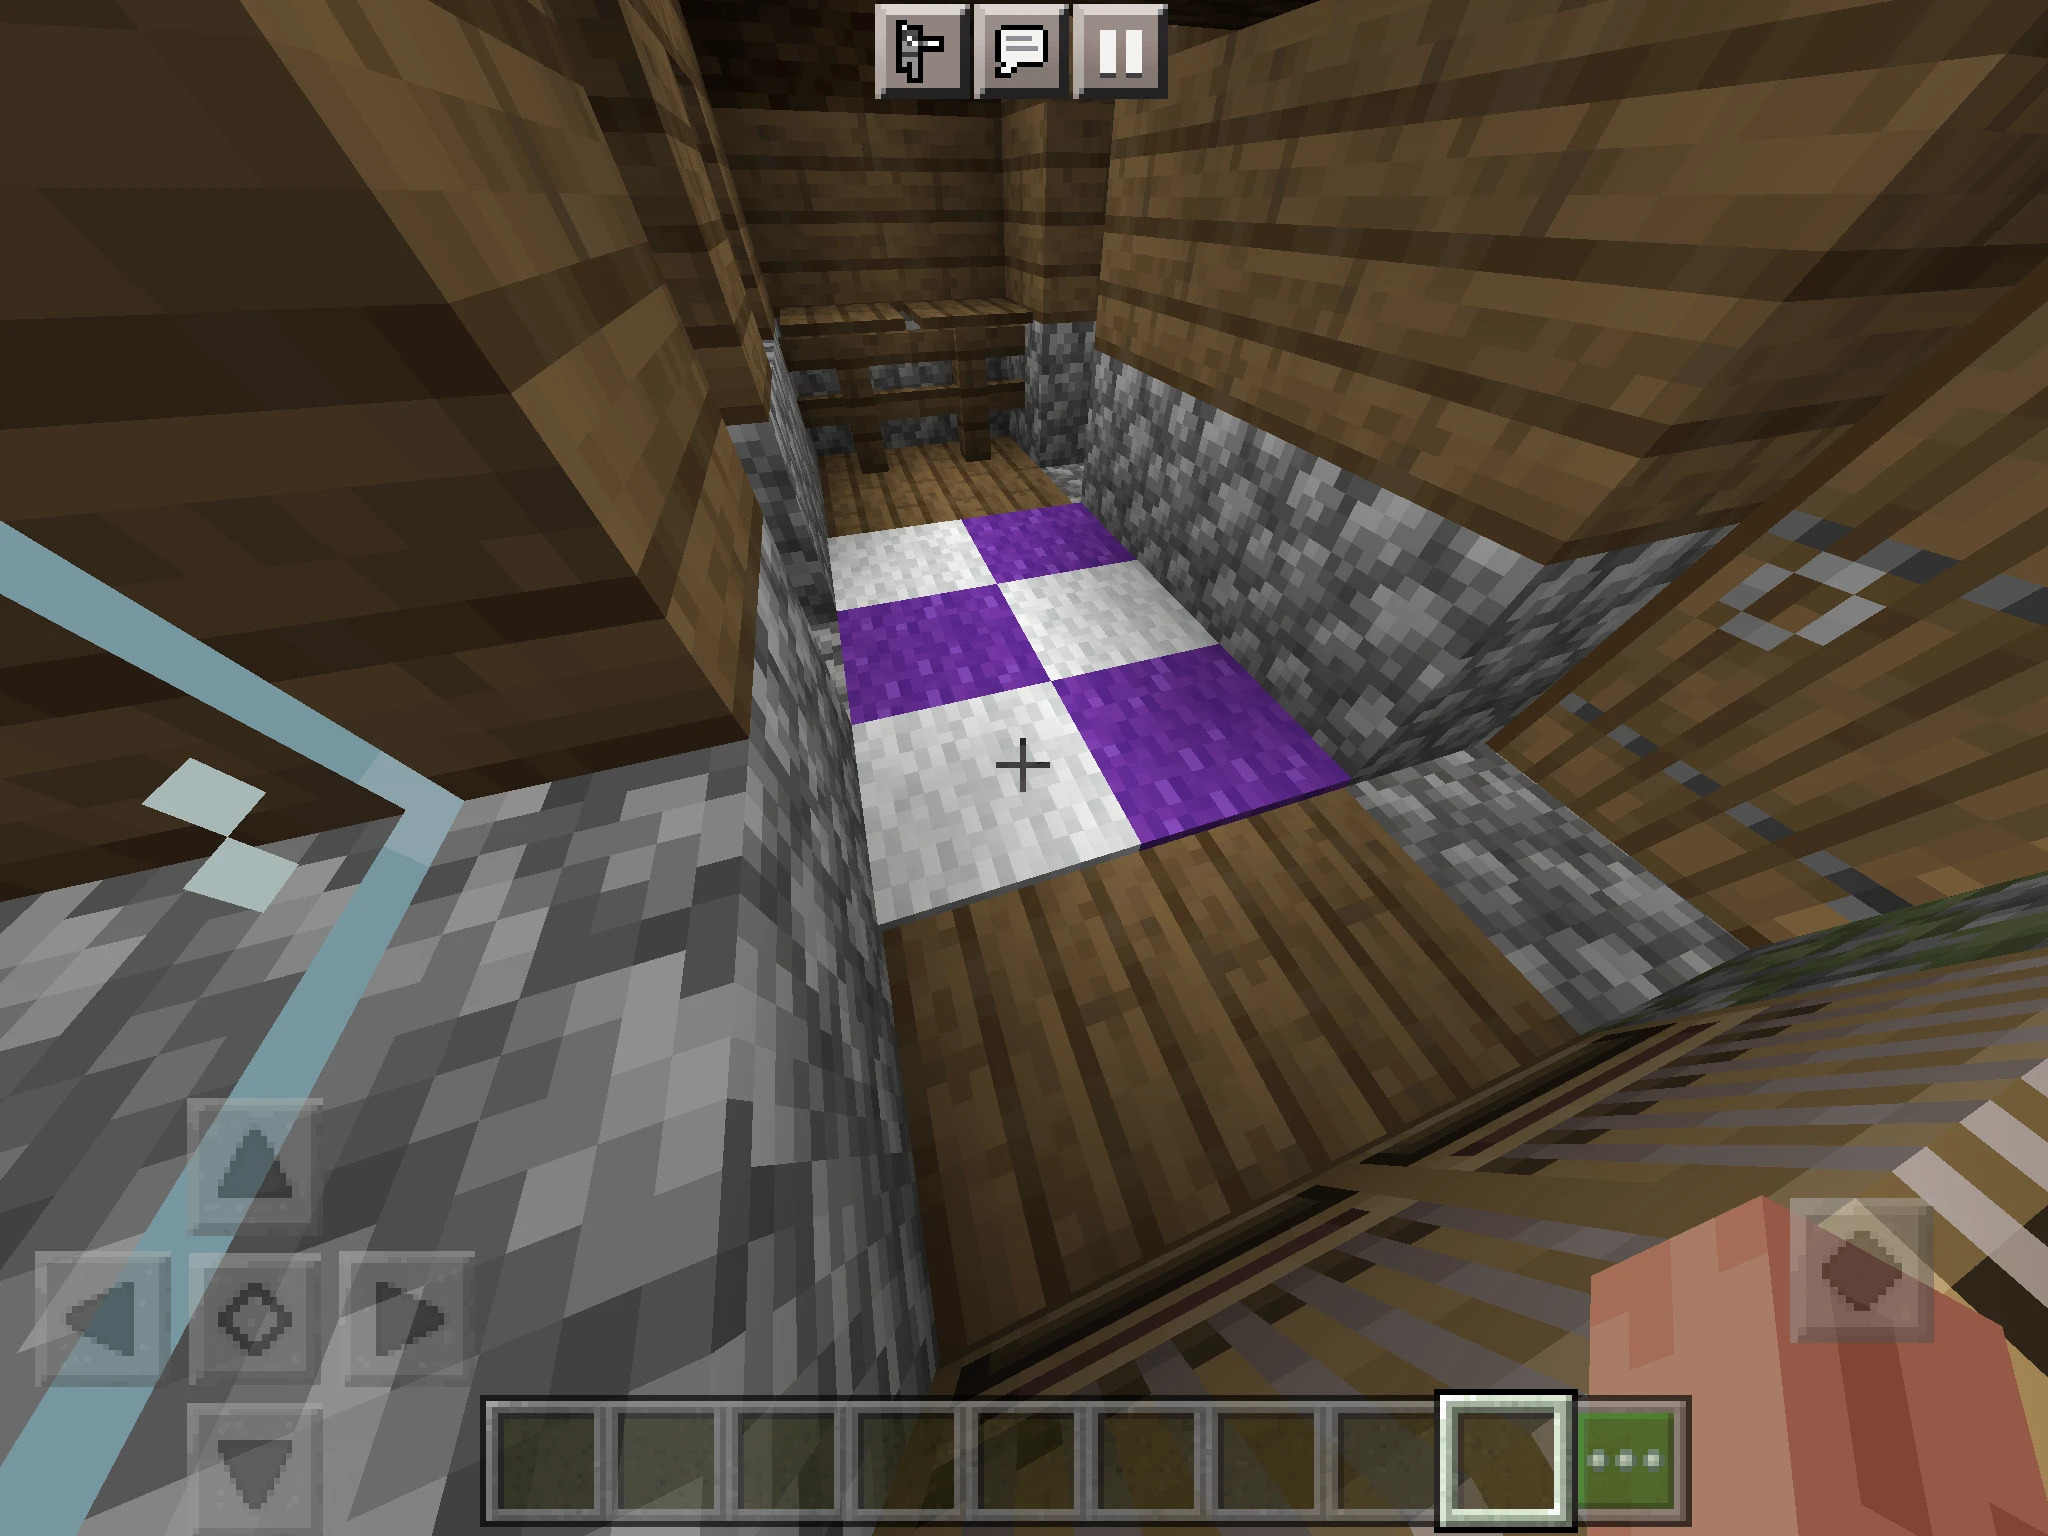 Finding Carpets in Minecraft